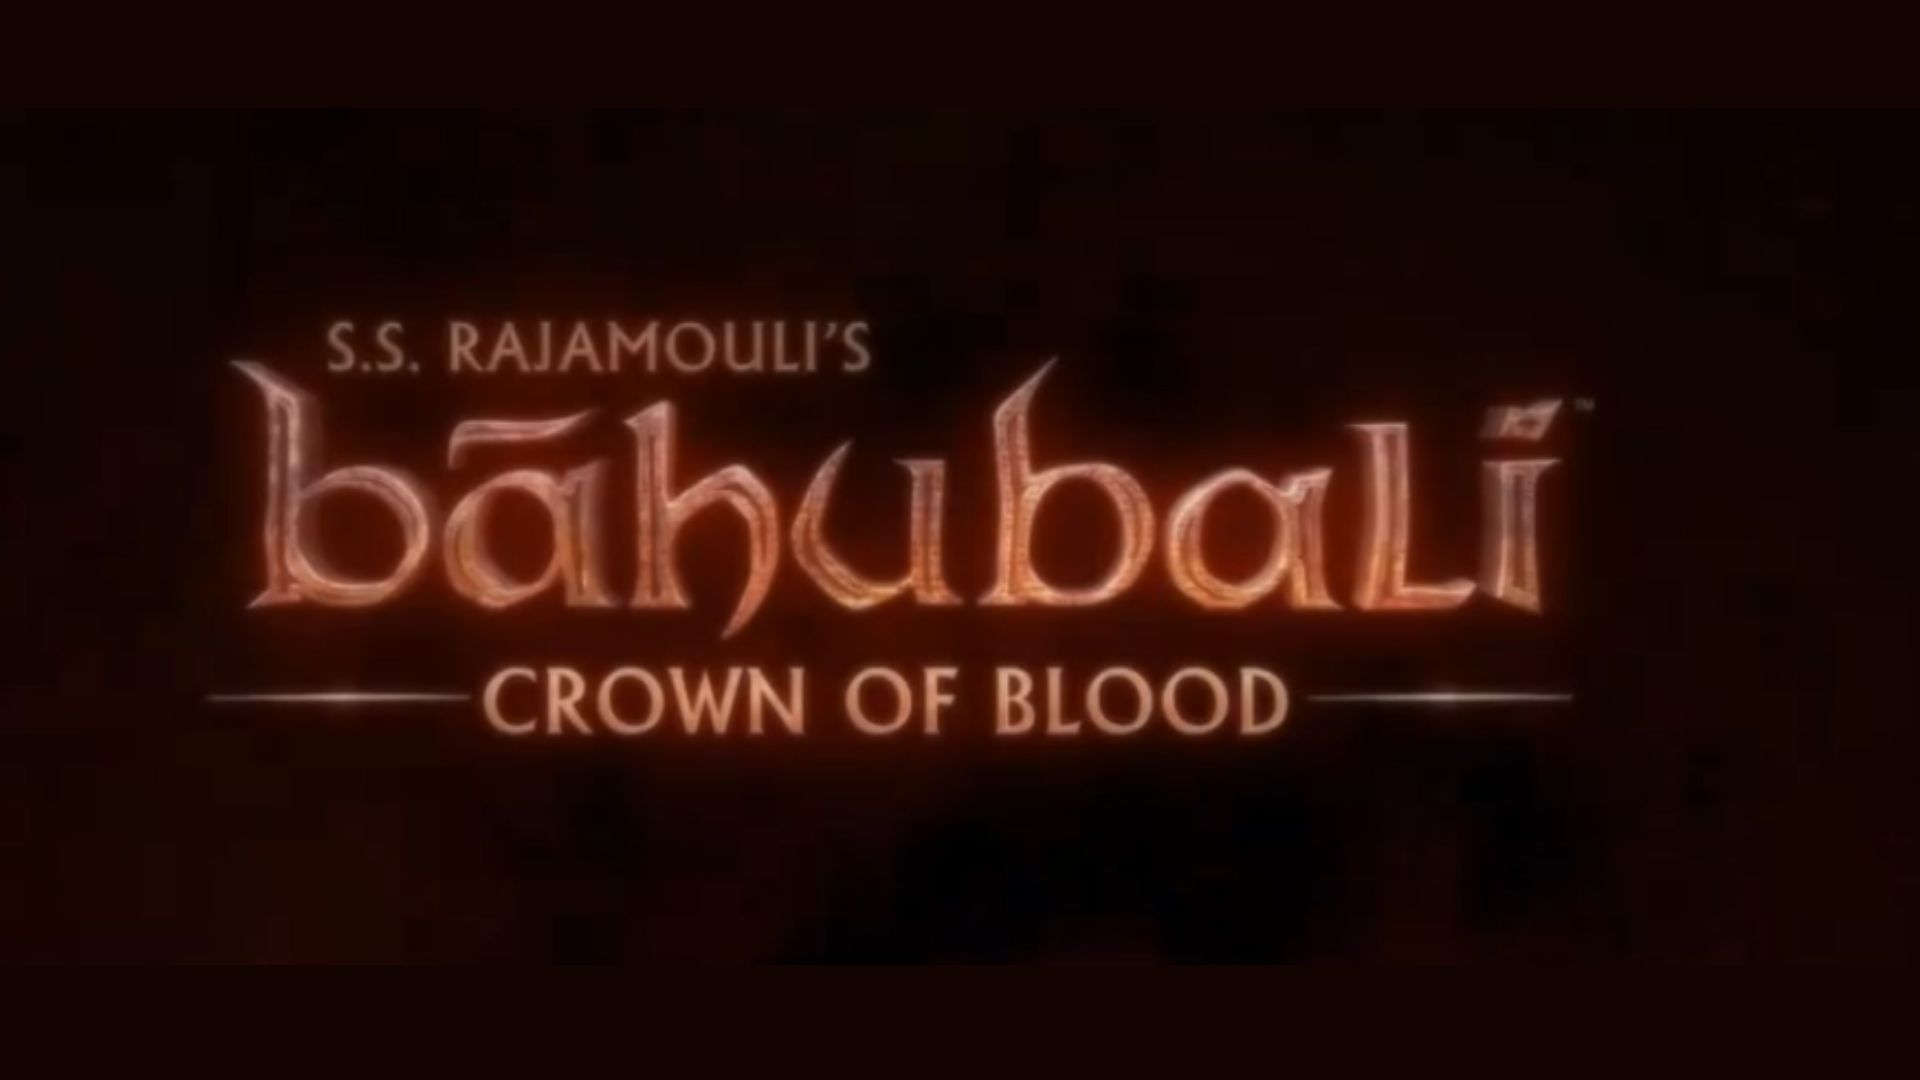 The animated series trailer for Baahubali: Crown of Blood will be released in the near future.